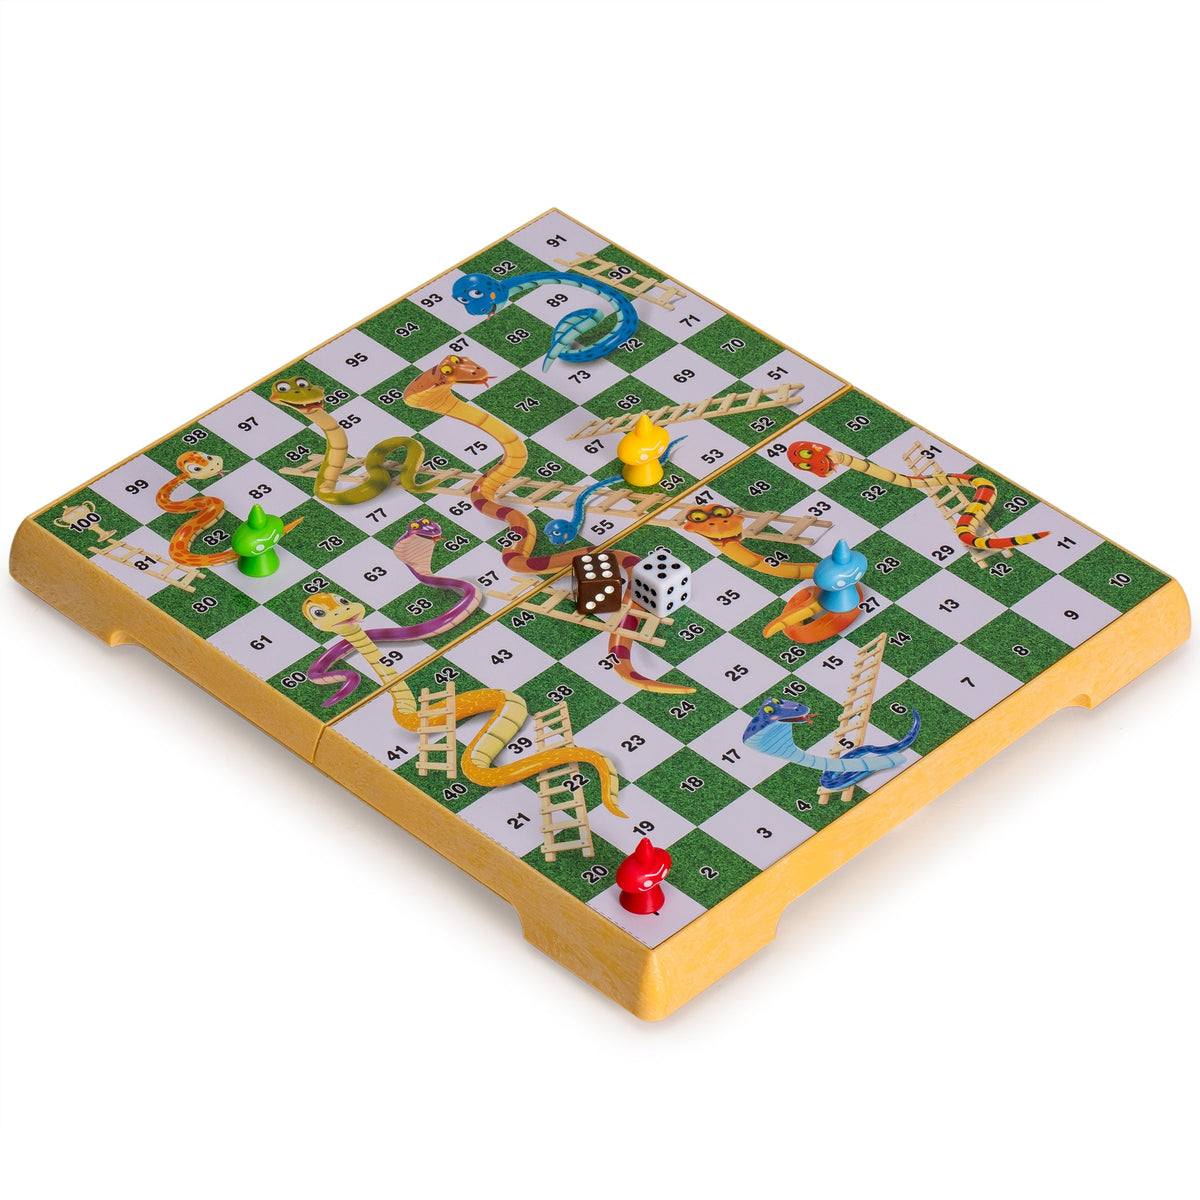 How to Play Snakes and Ladders – Yellow Mountain Imports